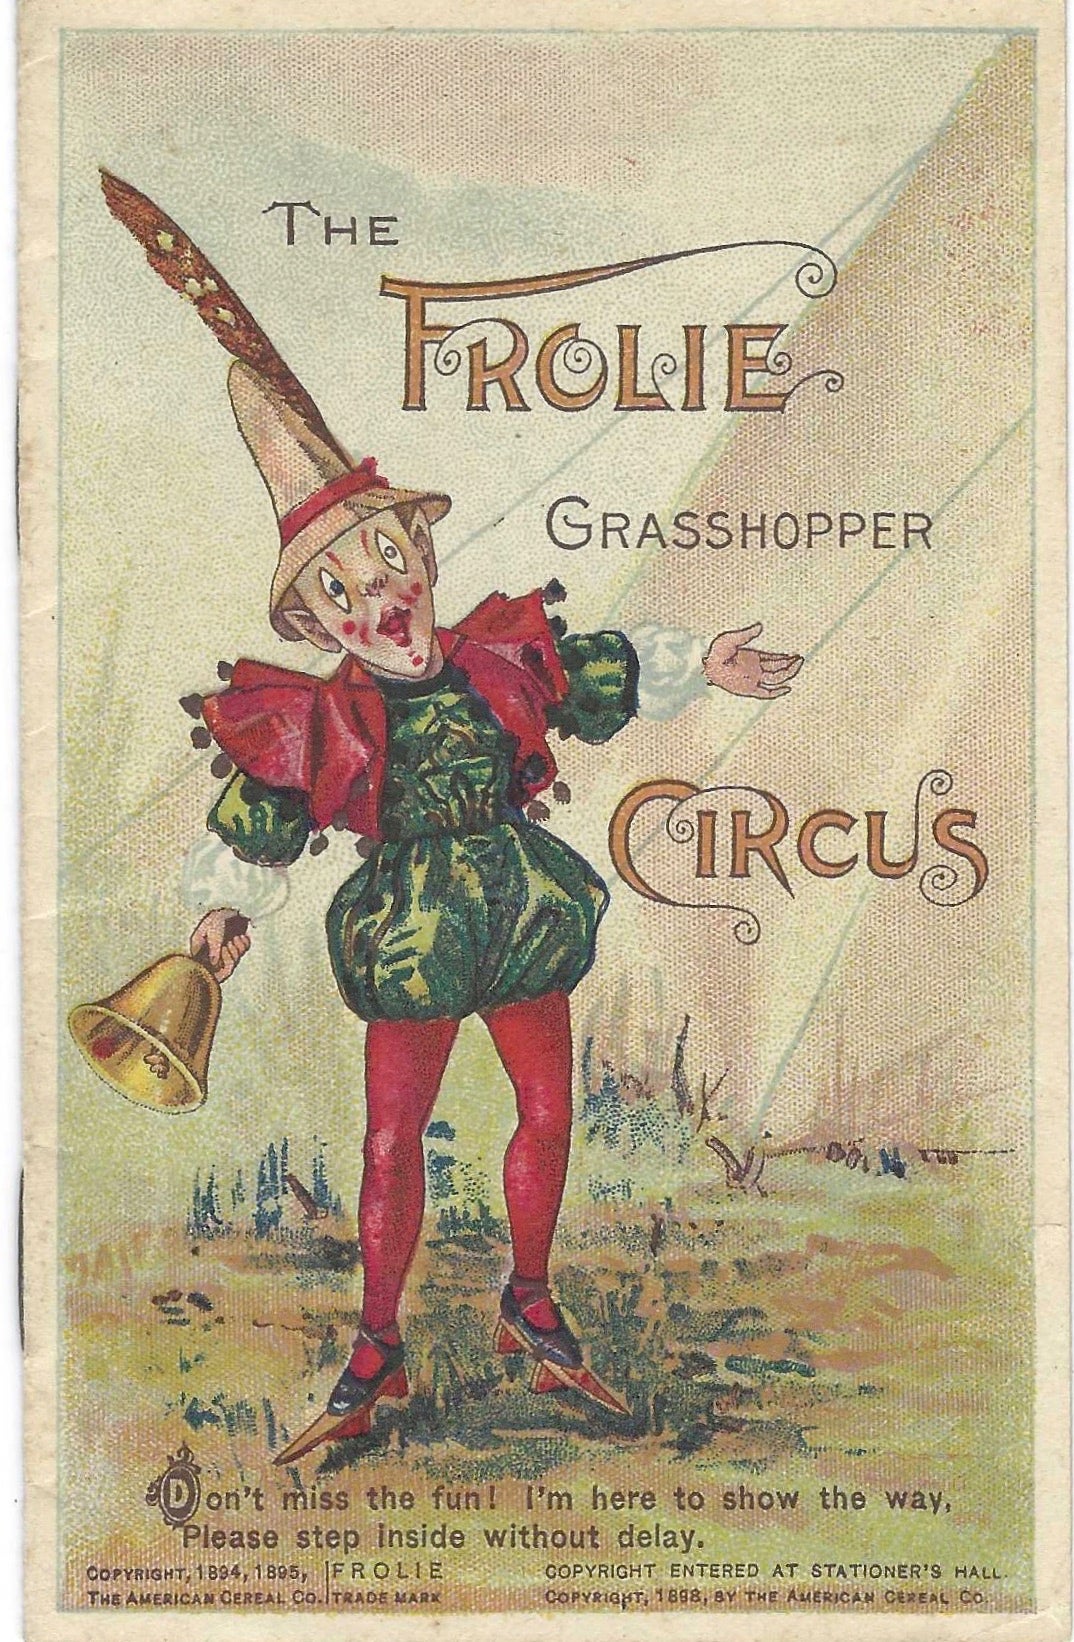 Item #8248 The Frolie Grasshopper Circus. Quaker Oats, American Cereal Co, Il. Chicago.